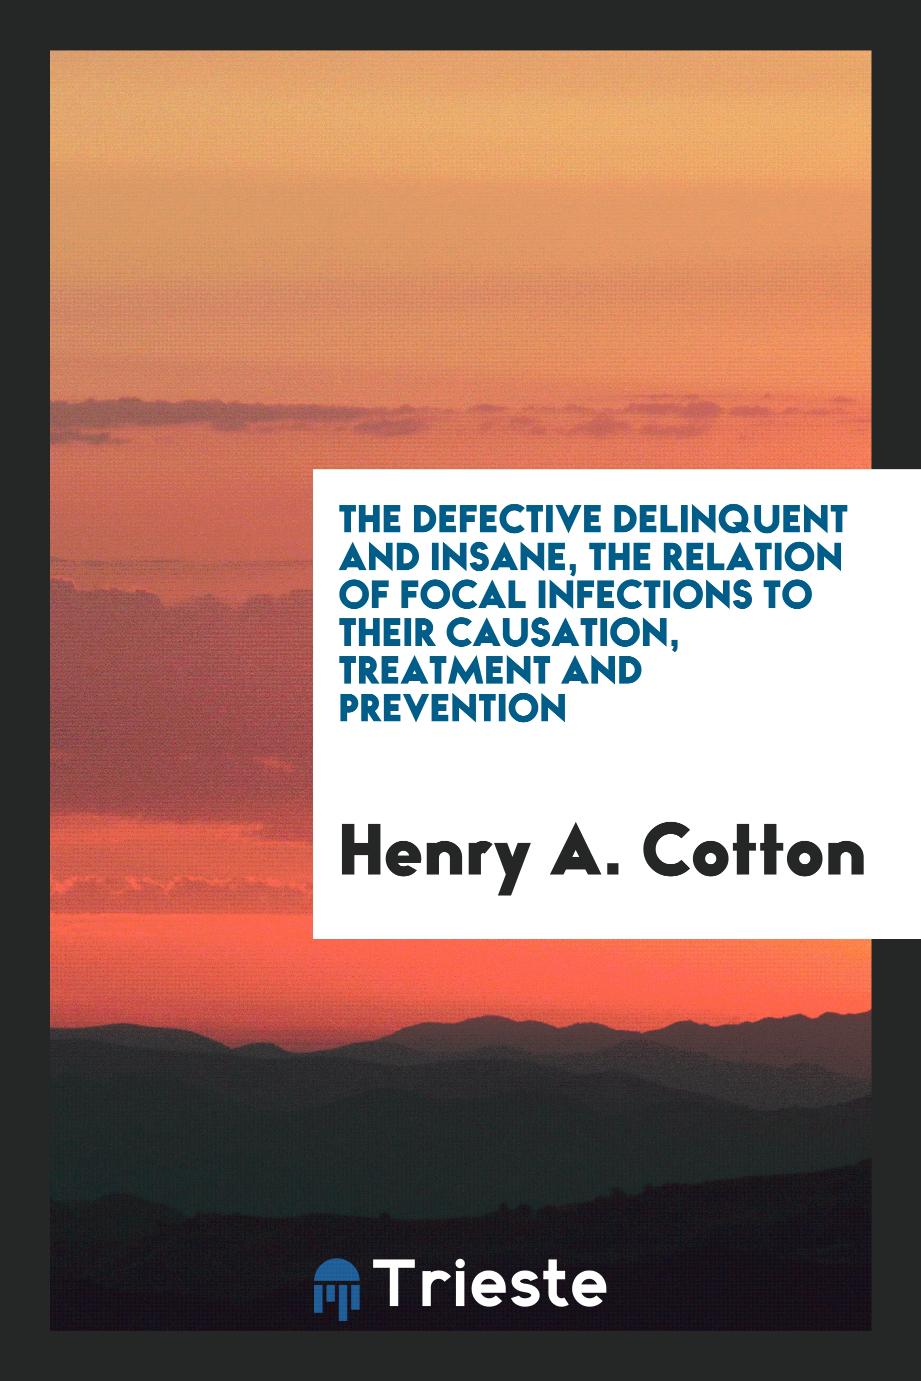 The defective delinquent and insane, the relation of focal infections to their causation, treatment and prevention